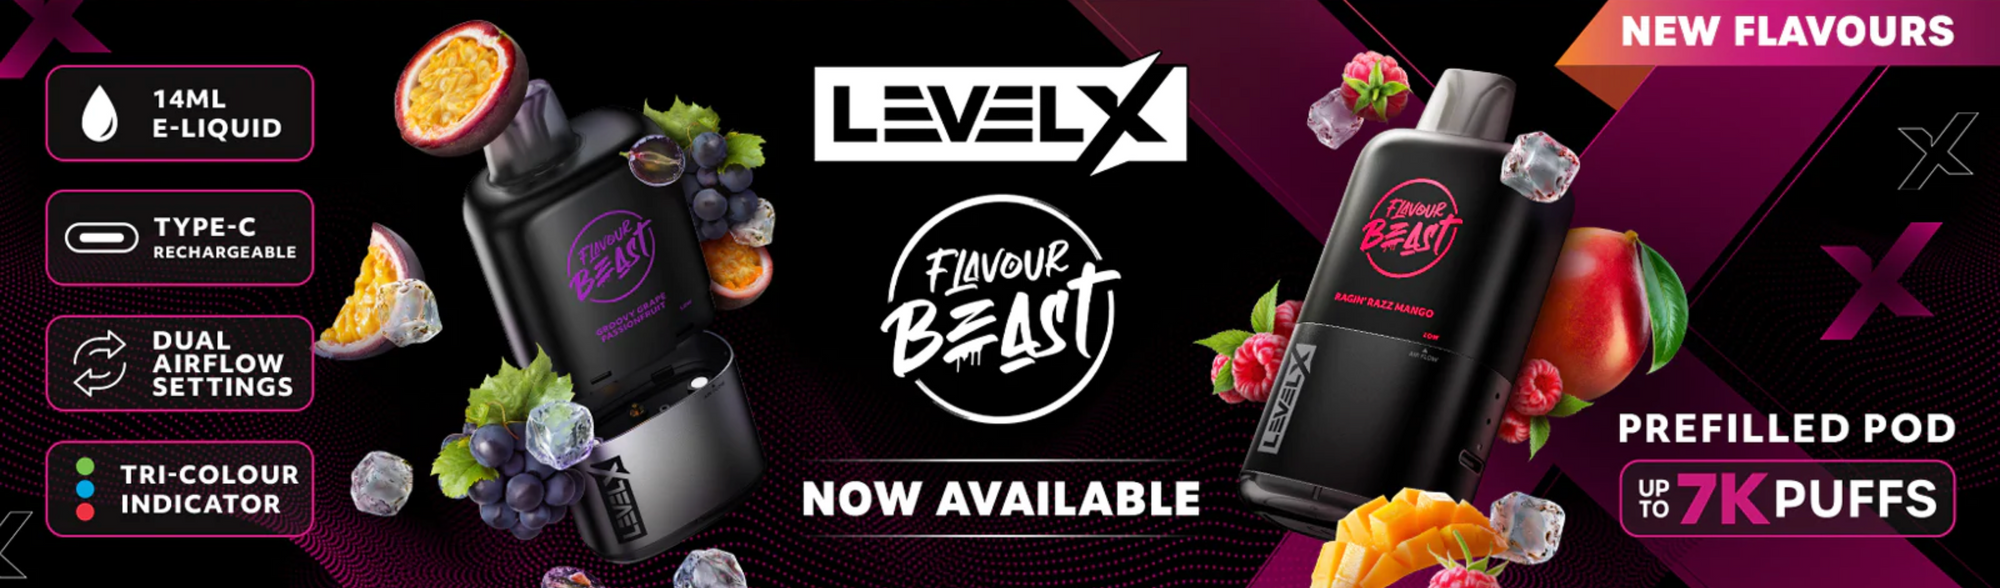 LEVEL X / FLAVOUR BEAST